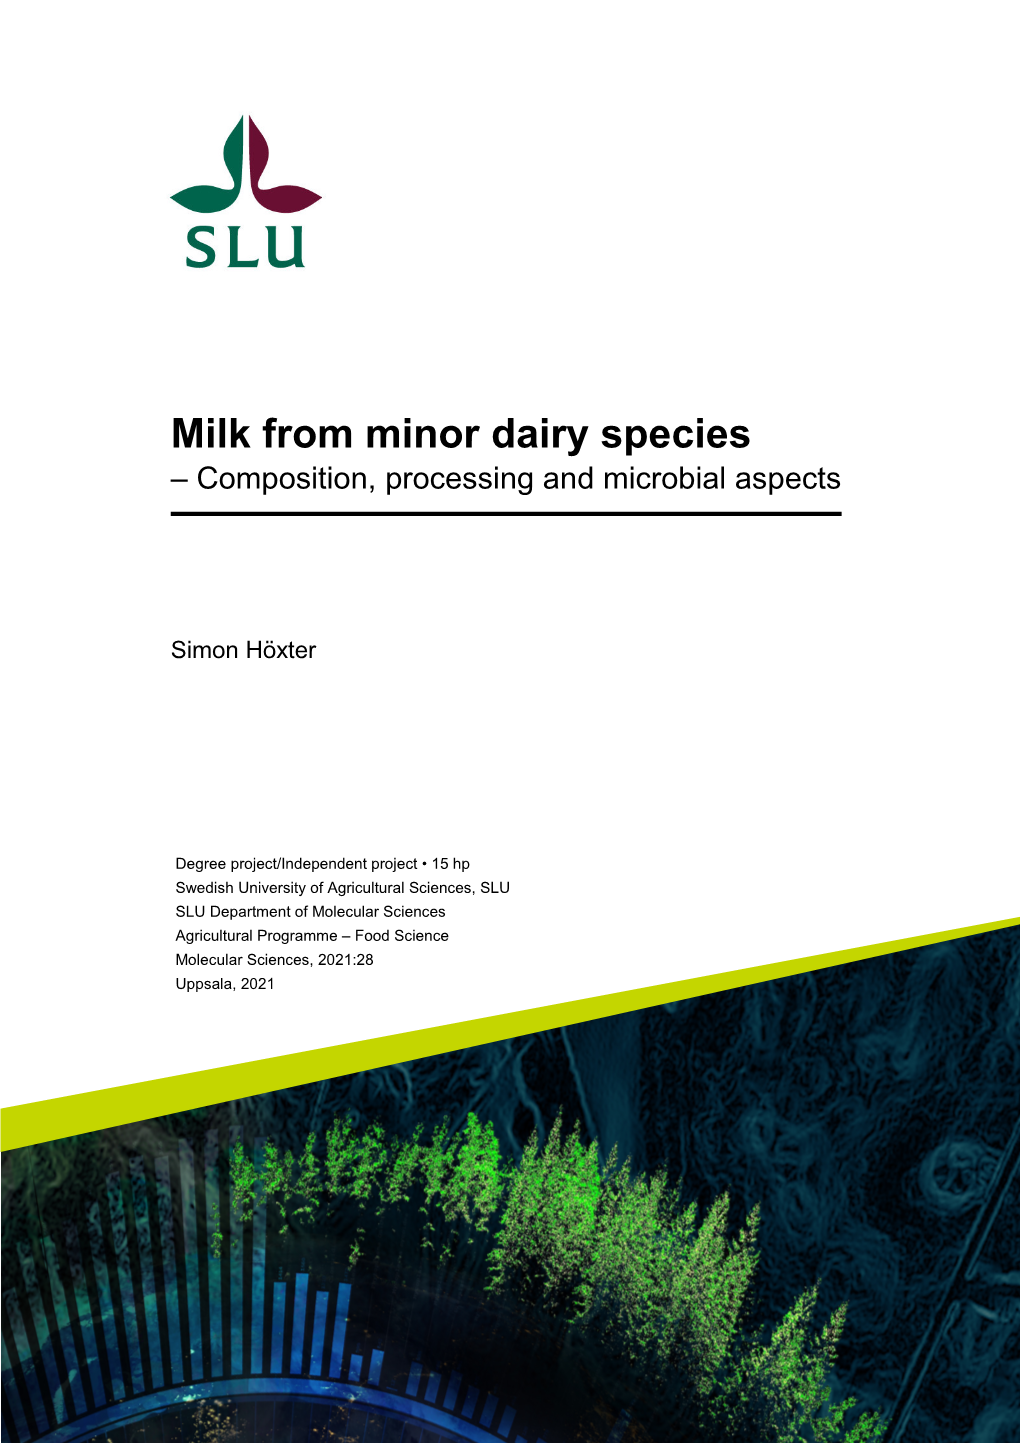 Milk from Minor Dairy Species – Composition, Processing and Microbial Aspects